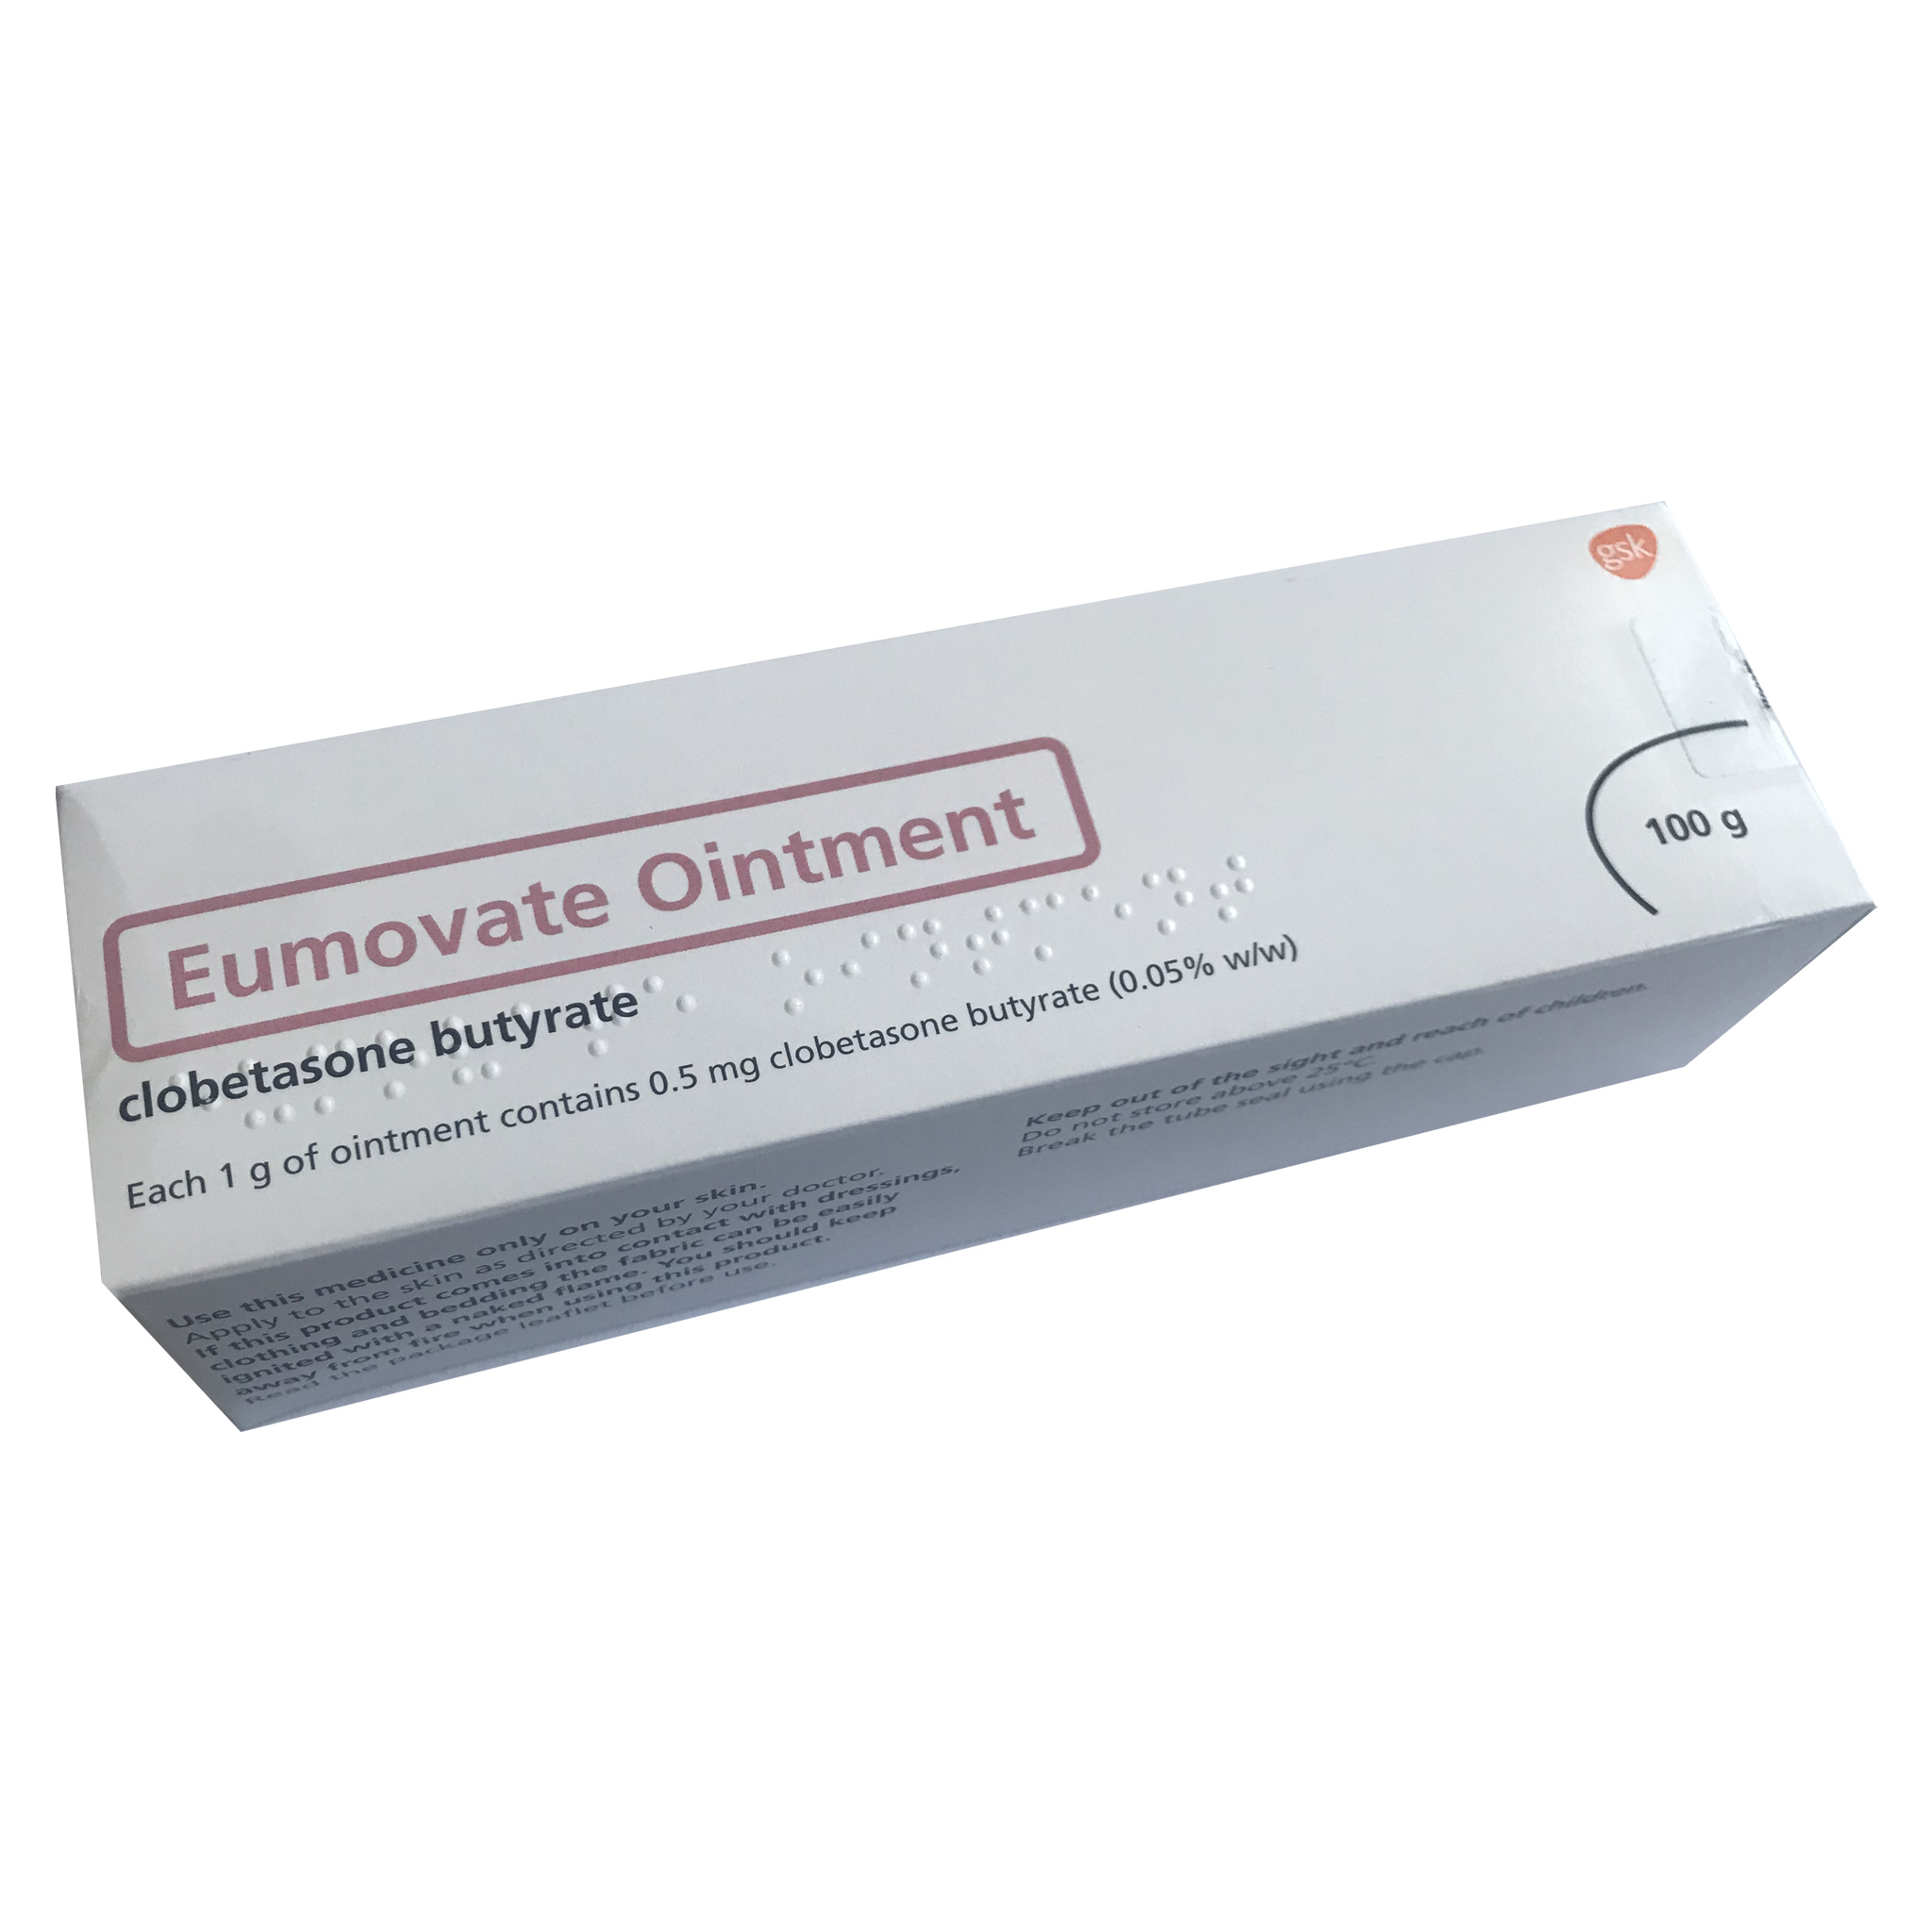 Eumovate 0.05% Cream/Ointment - Ointment, 100g